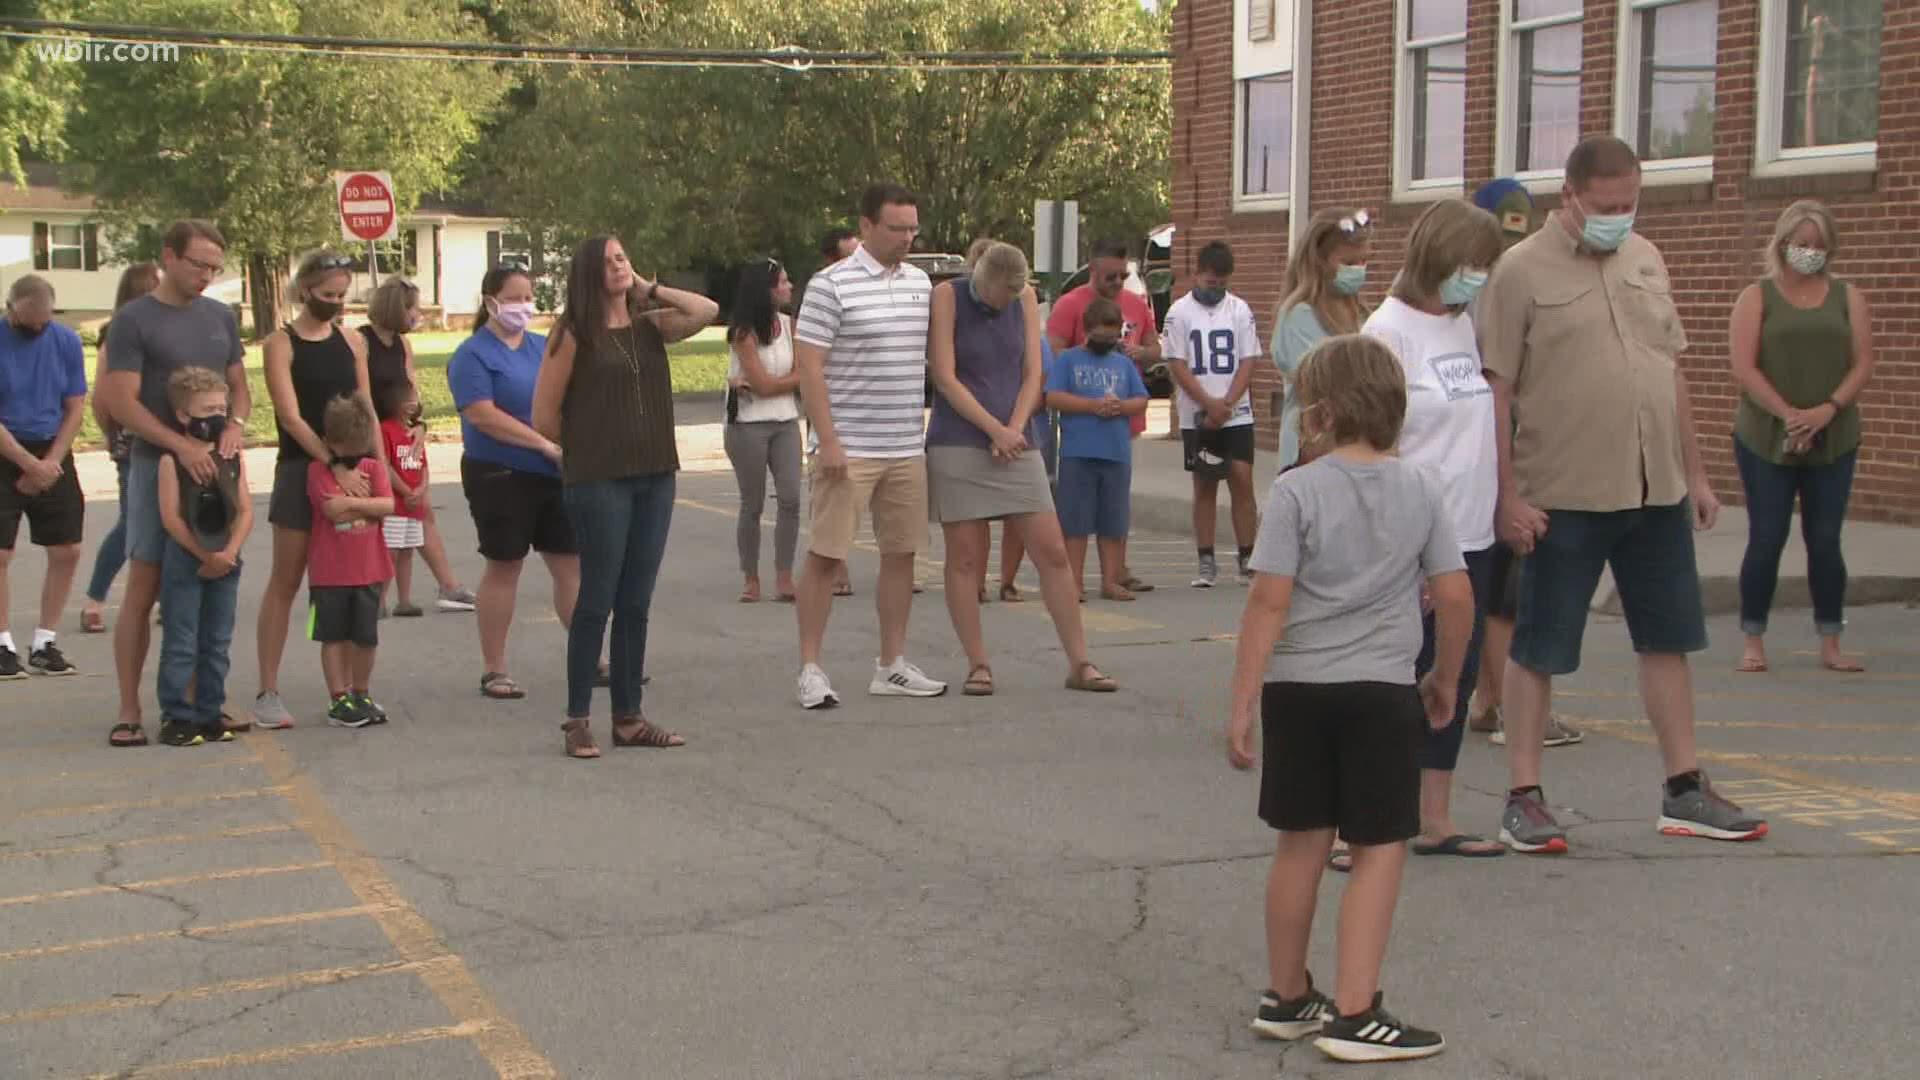 They gathered at Blue Grass Elementary... to hope for a good year in an uncertain time.